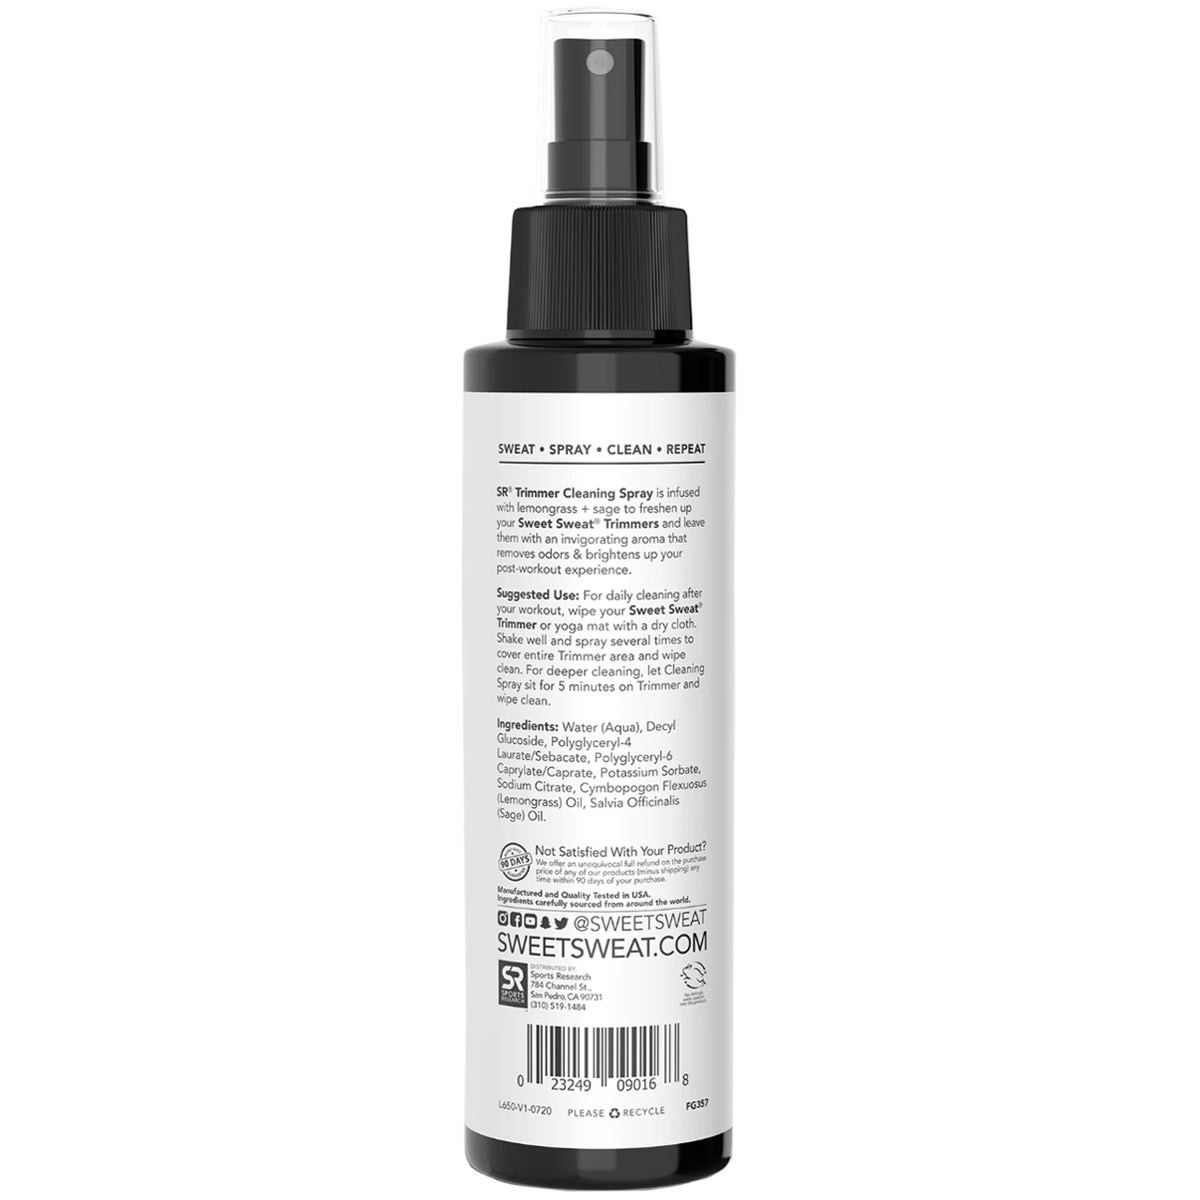 Sports Research 4 oz. Sweet Sweat Trimmer Cleaning Spray - Lemongrass/Sage Sports Research